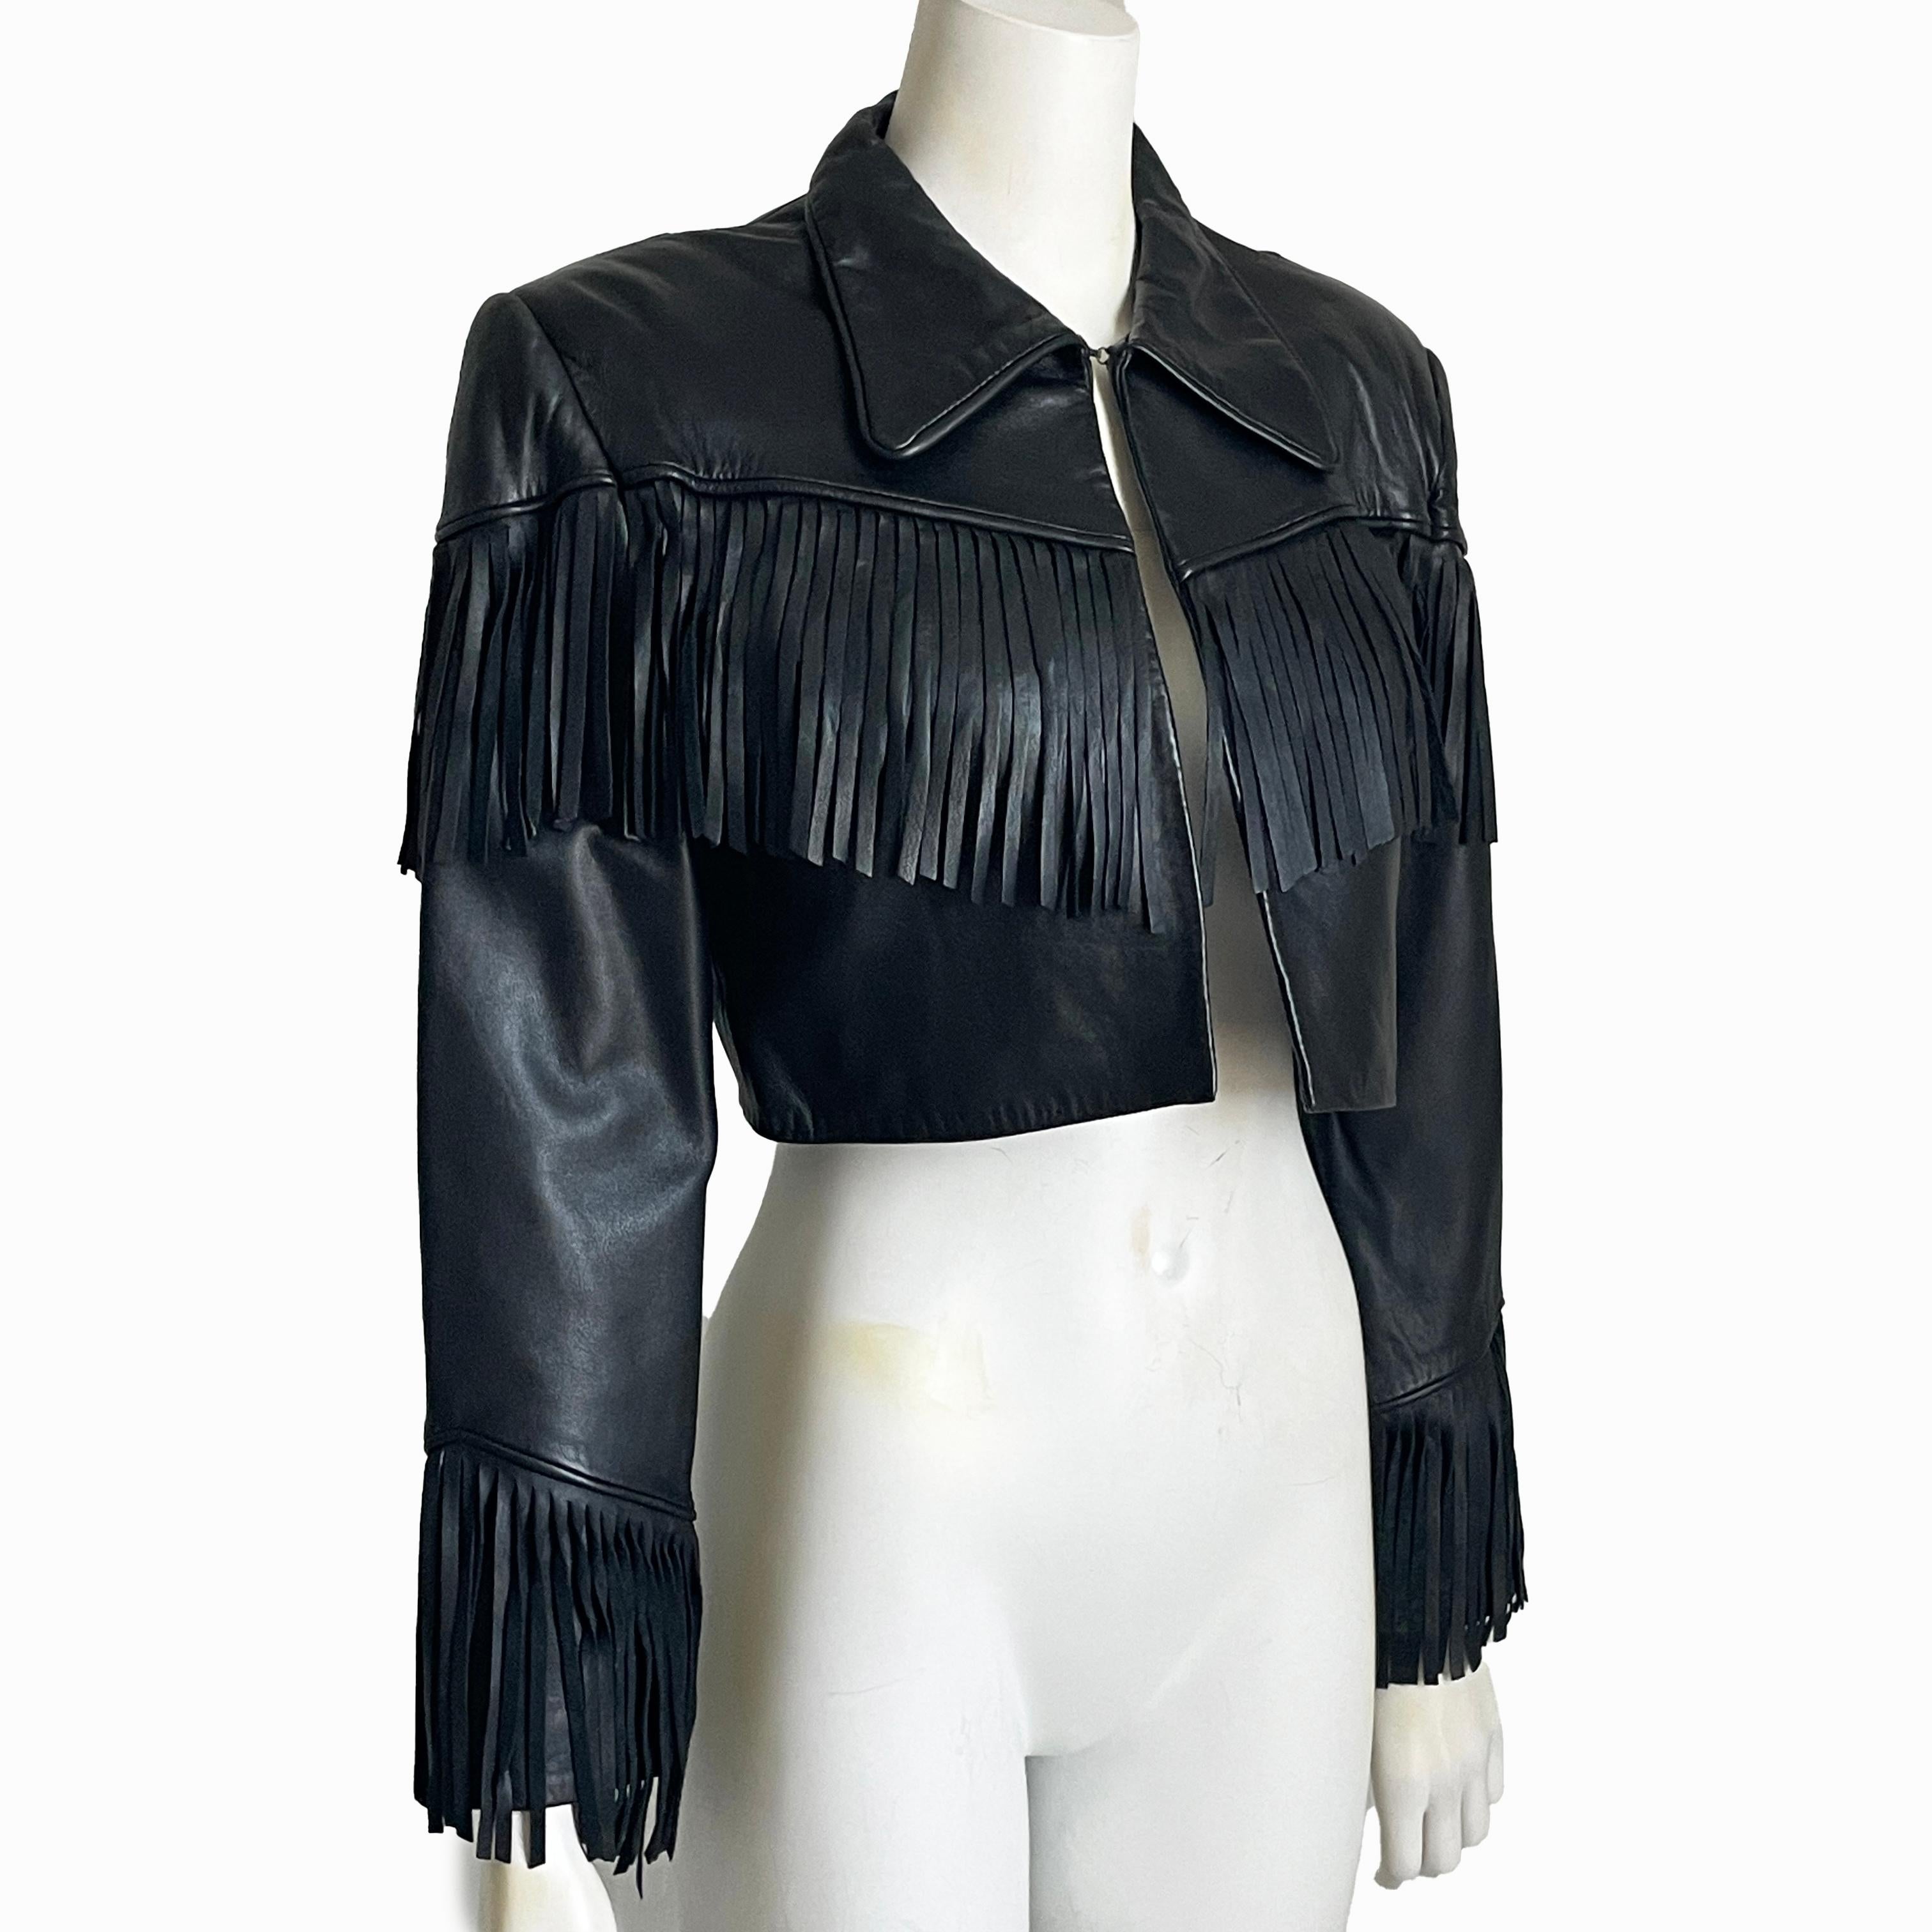 Preowned, vintage Norma Kamali cropped black leather jacket with fringe, likely made in the early 90s.  Made from supple lambskin, it's lined in black satin and fastens with a single hook/eye closure at the collar.

Definitely rocker chic vibes with